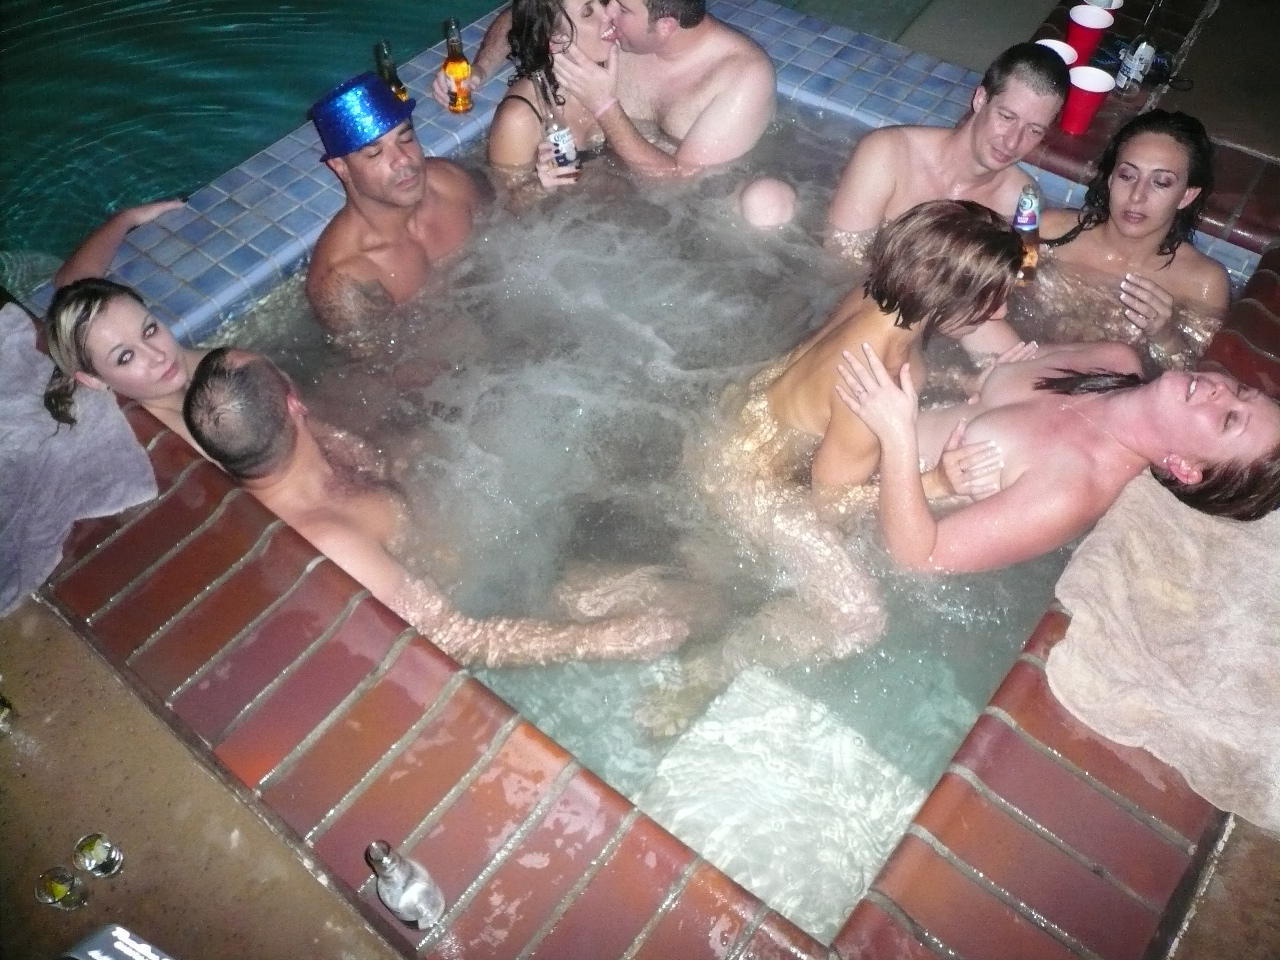 Nude party hot tub images